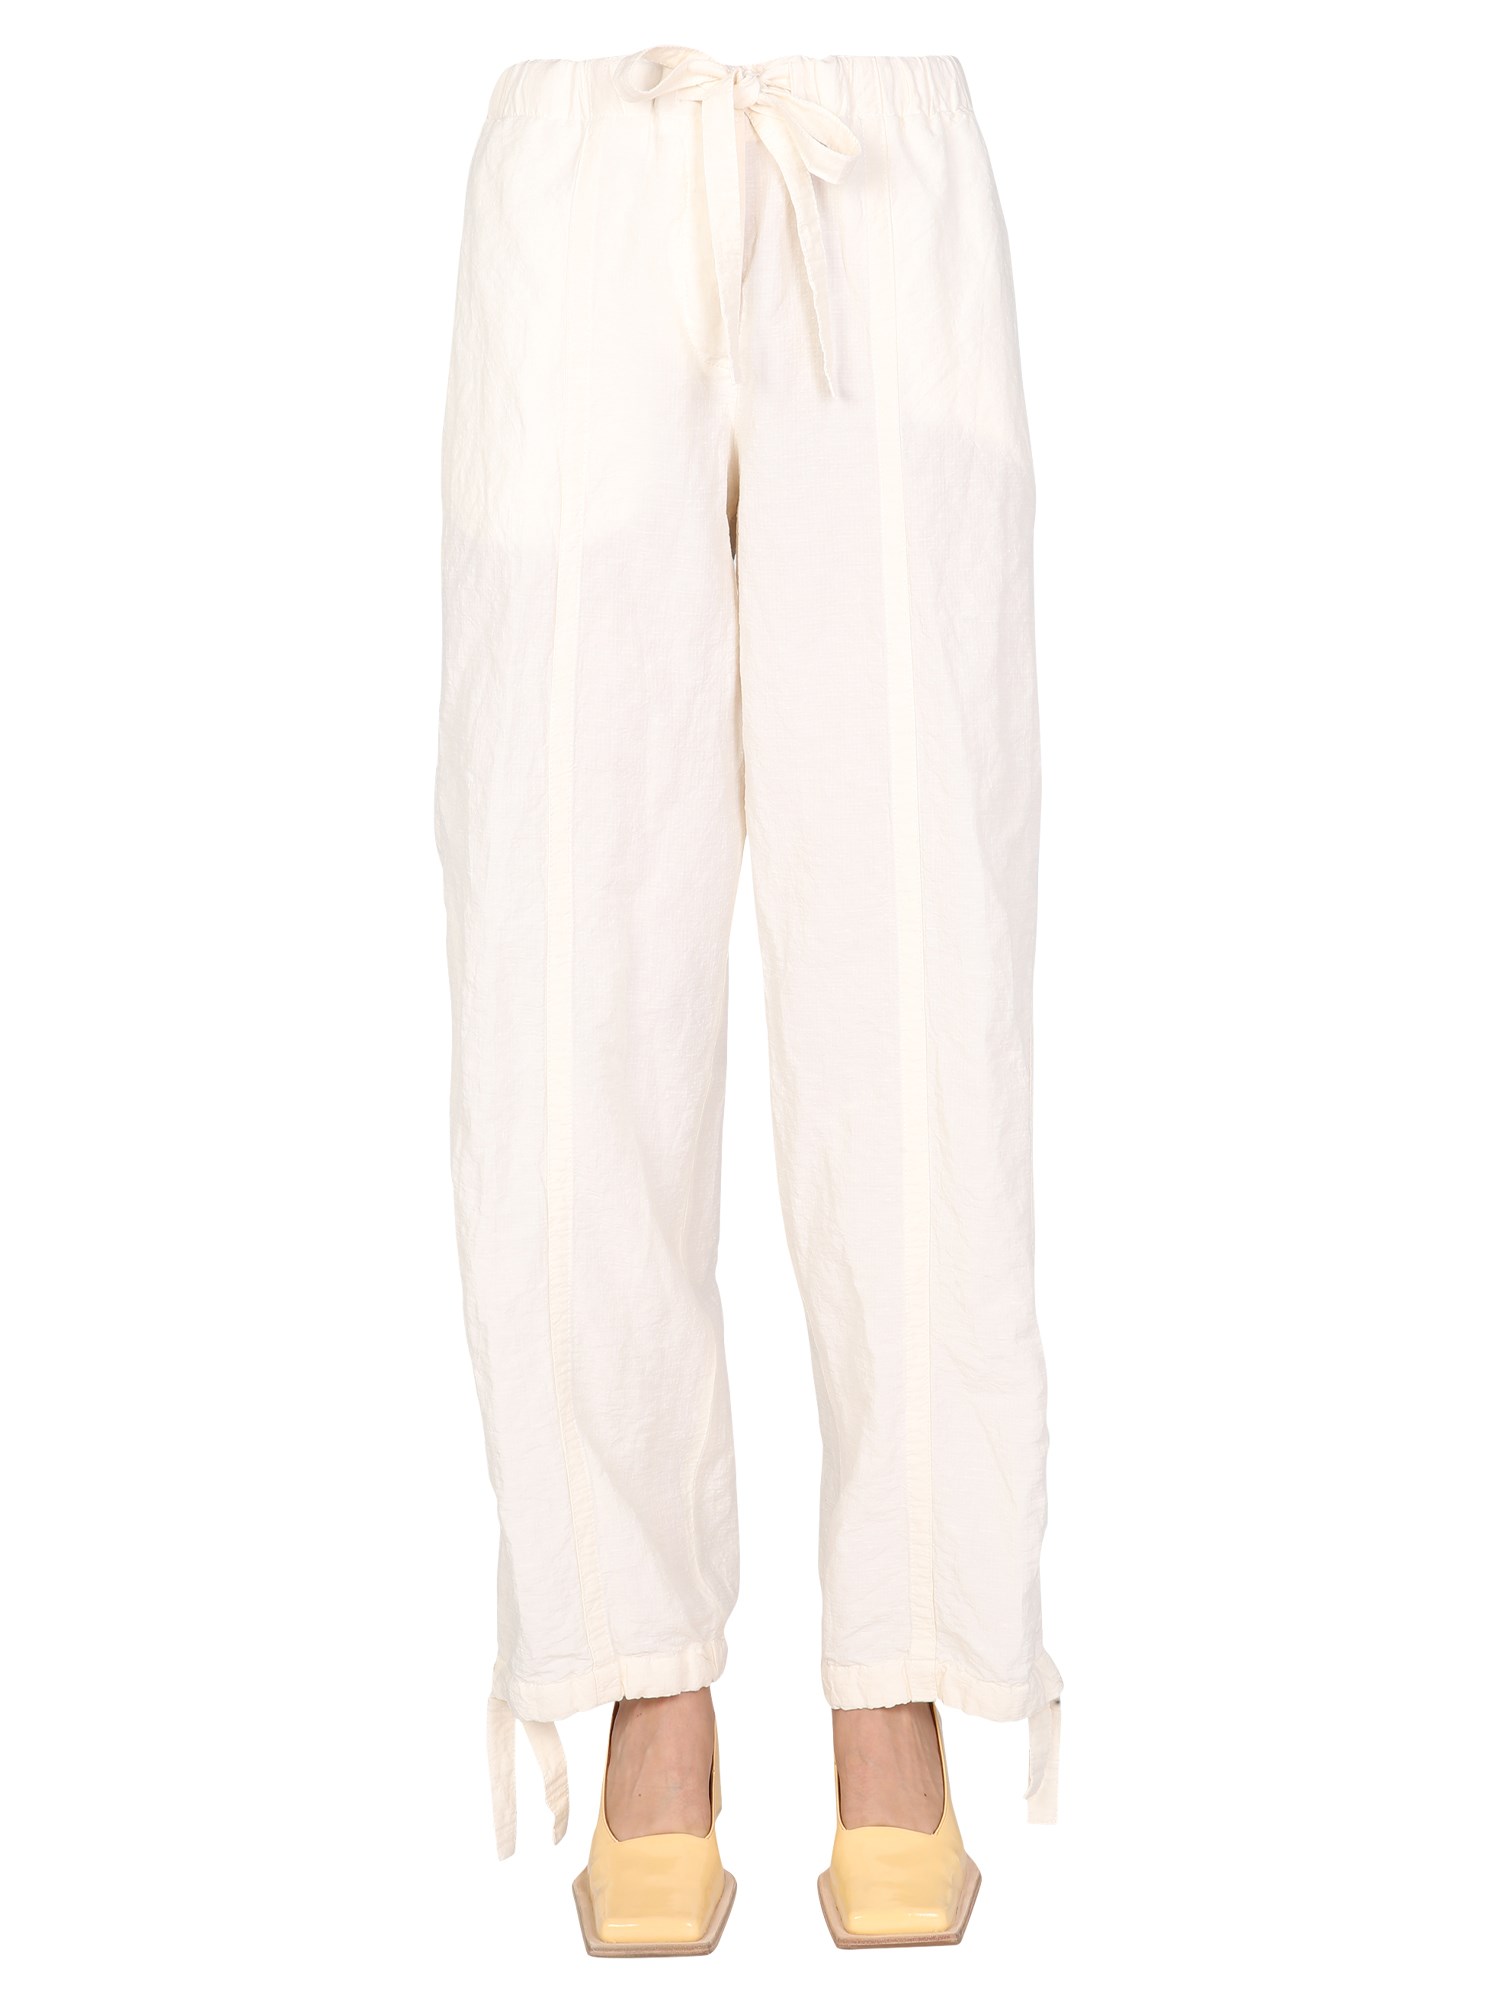 jil sander trousers with drawstring